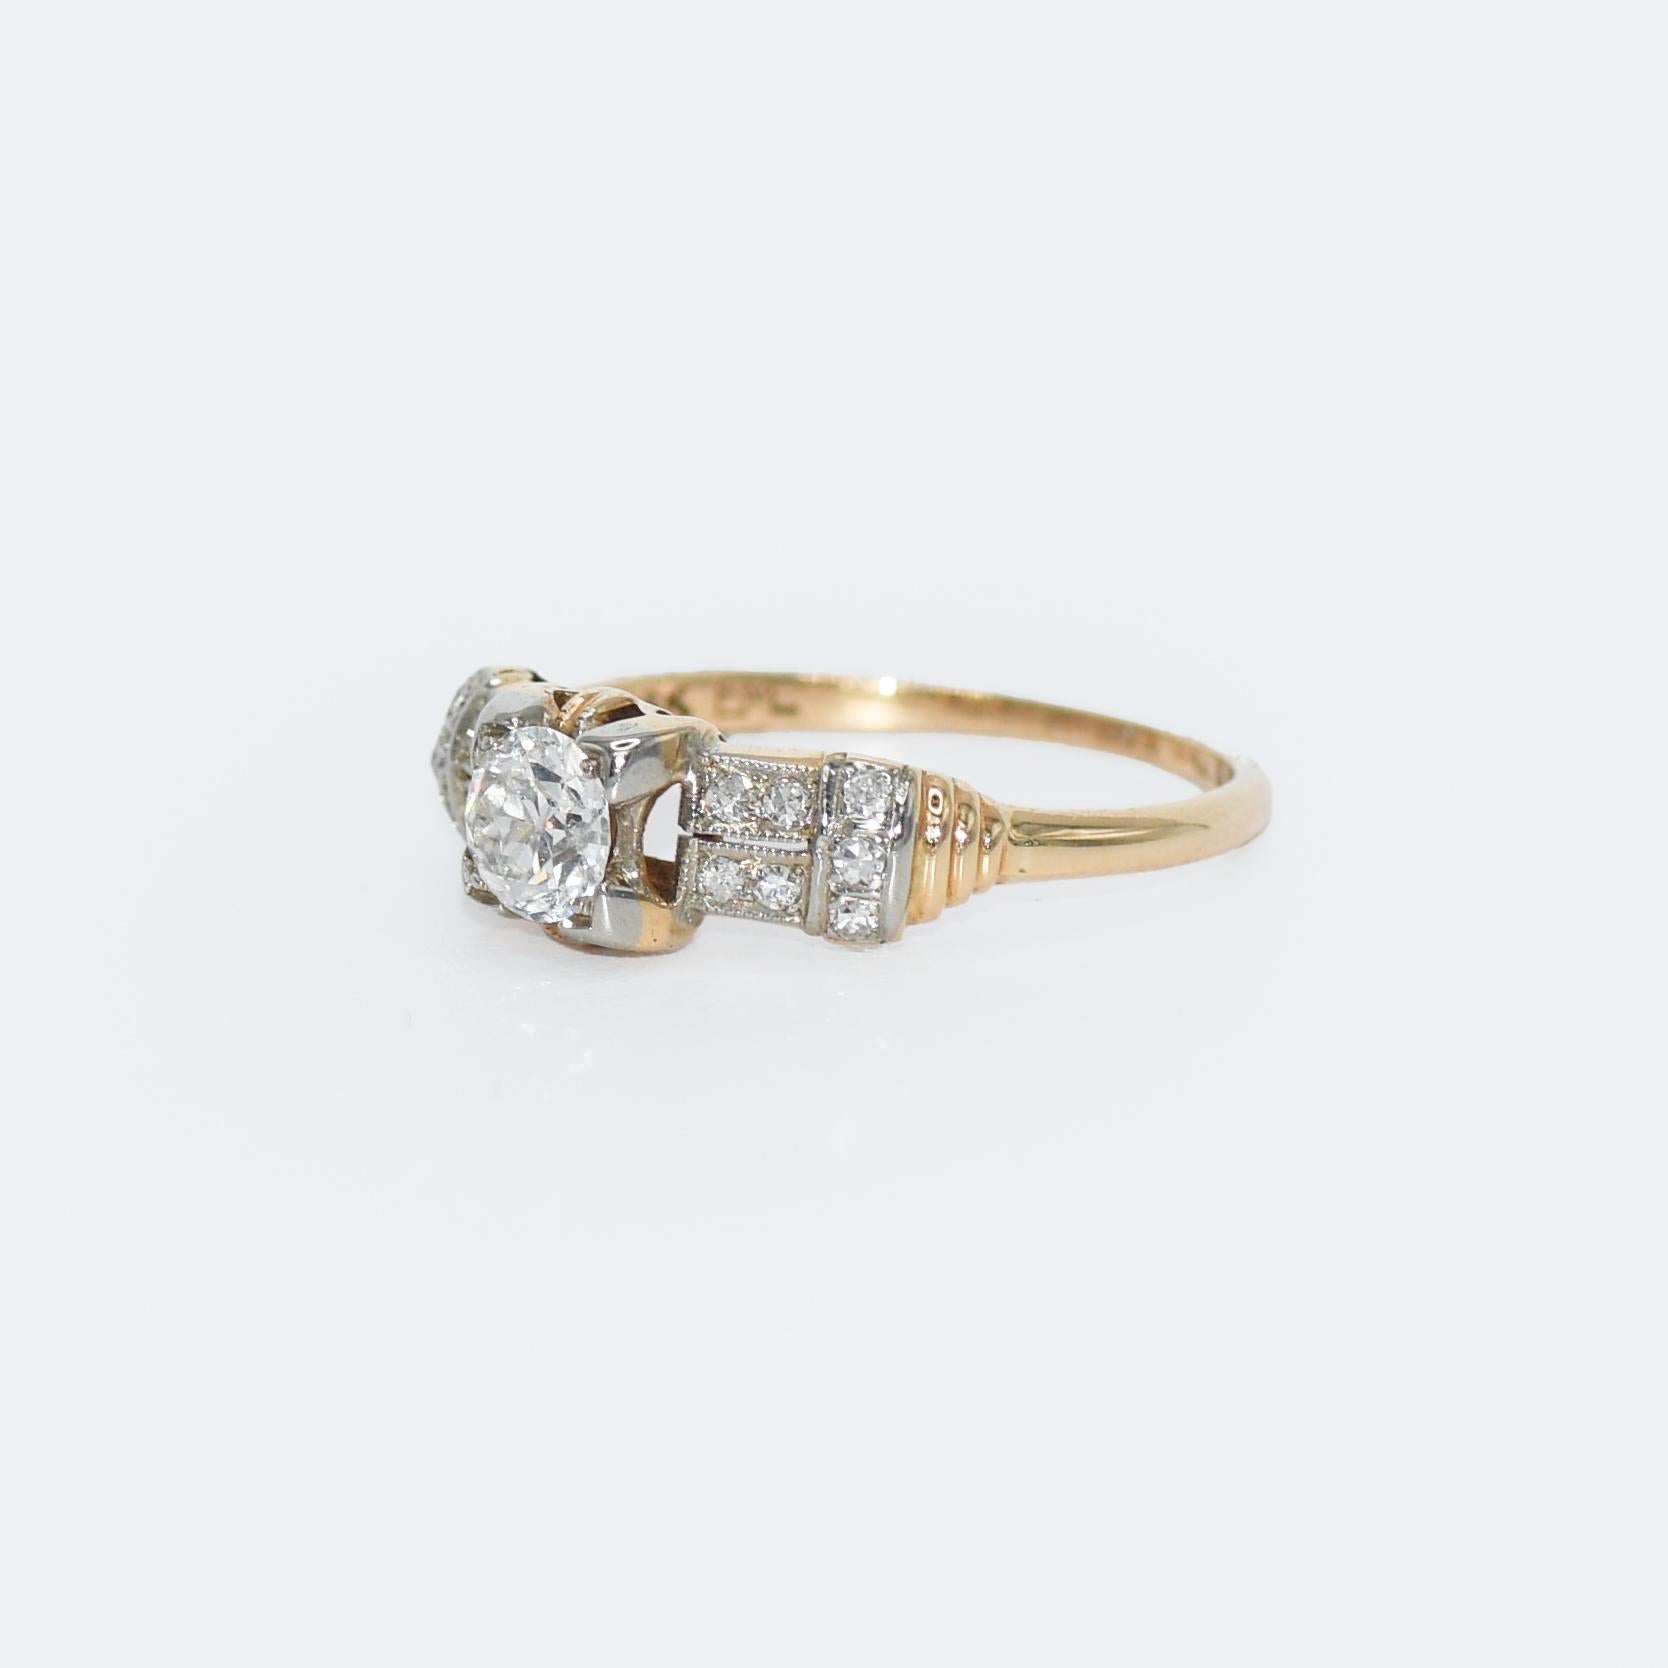 18k Yellow Gold 0.54ct Diamond Art Deco Engagement Ring, Size 6.5 For Sale 1